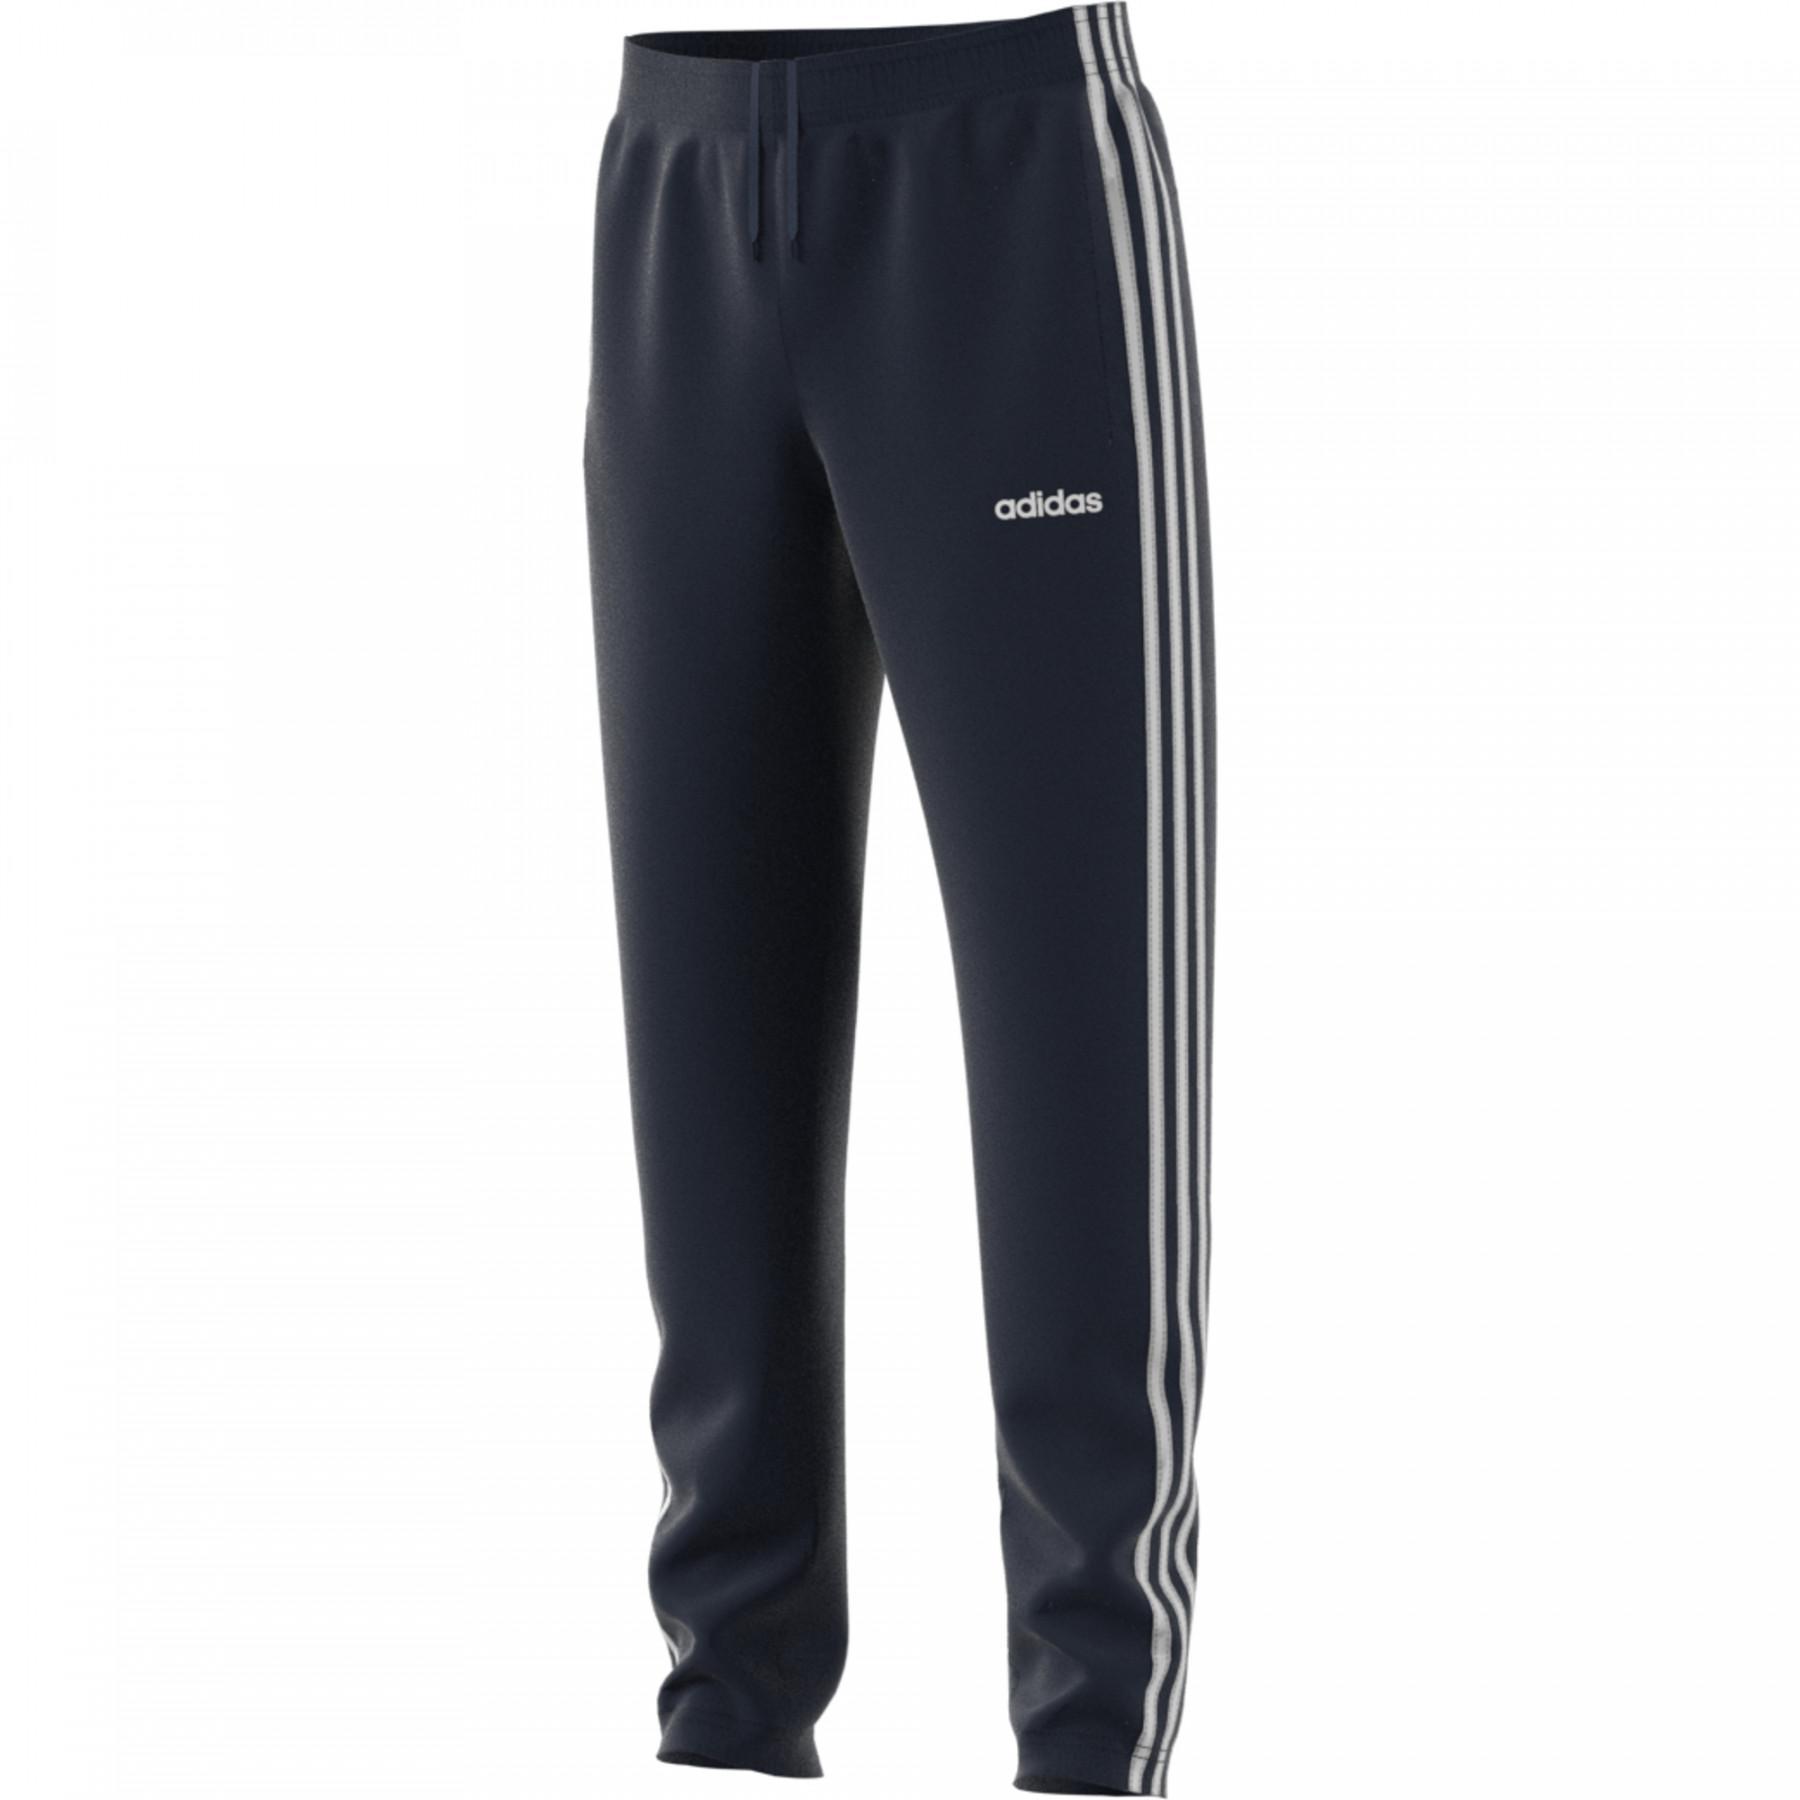 Children's trousers adidas 3-Stripes